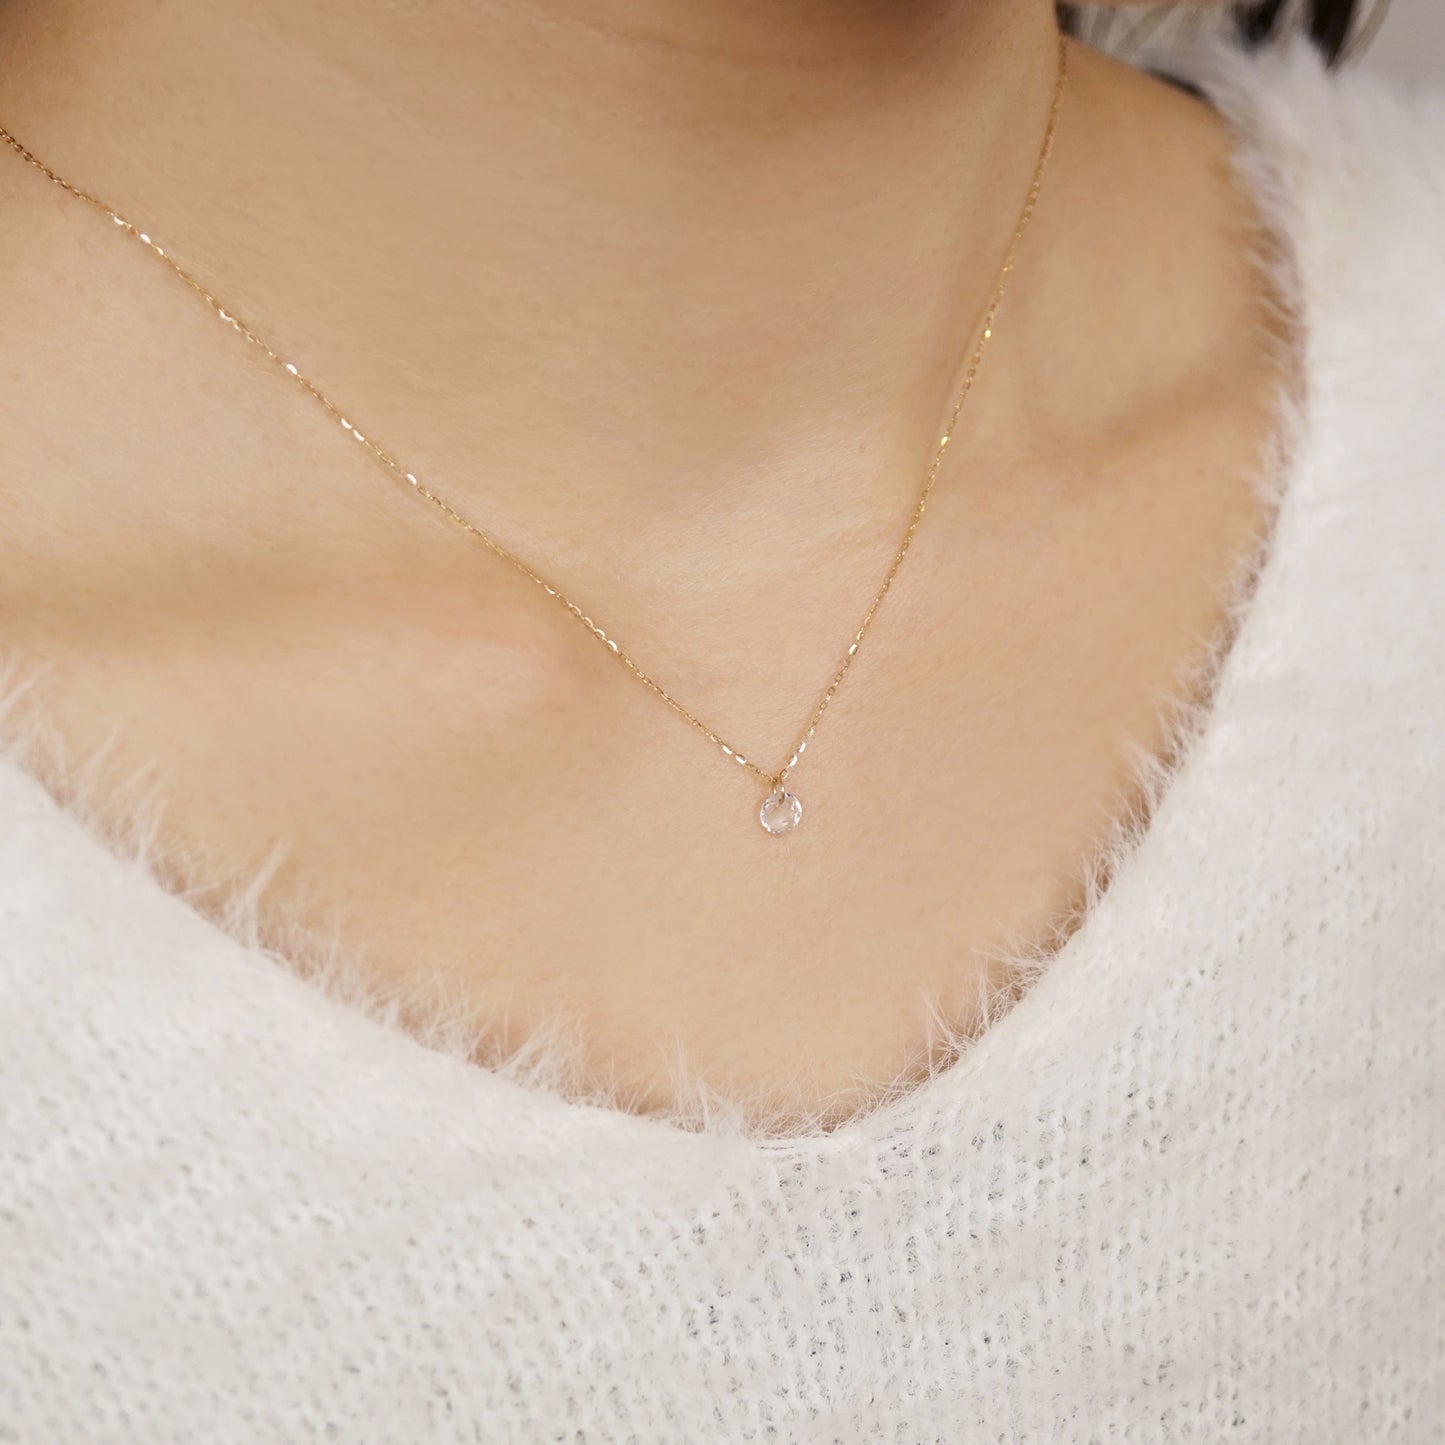 10K "Grain of Light" 2Way Necklace (Yellow Gold) - Model Image